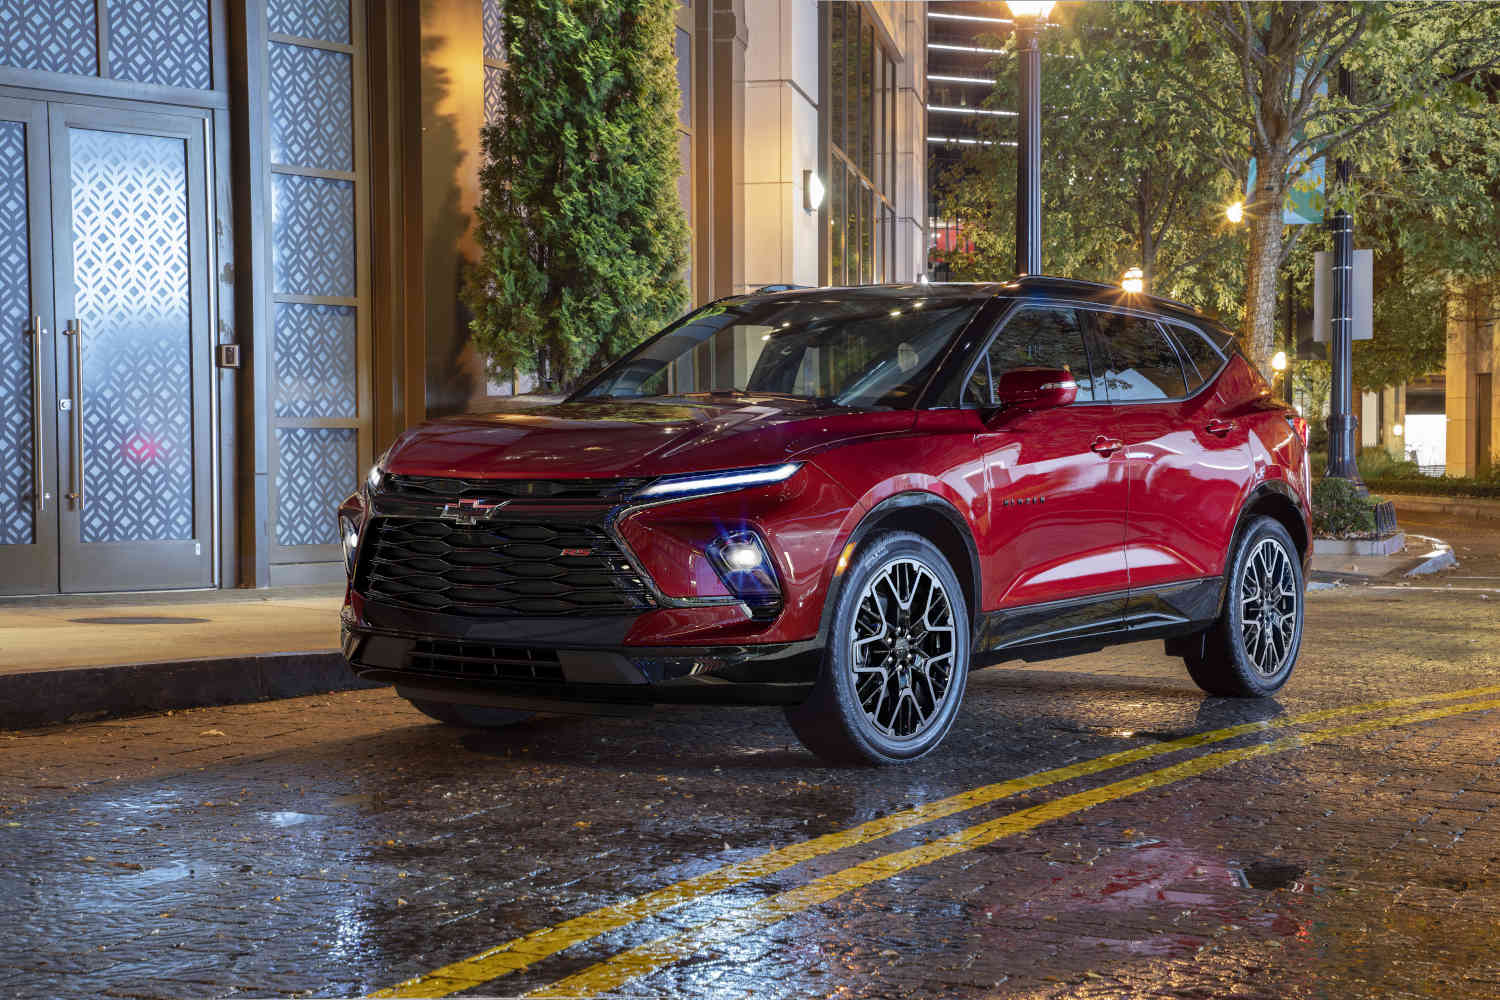 The most reliable midsize SUVs for the money include this 2023 Blazer